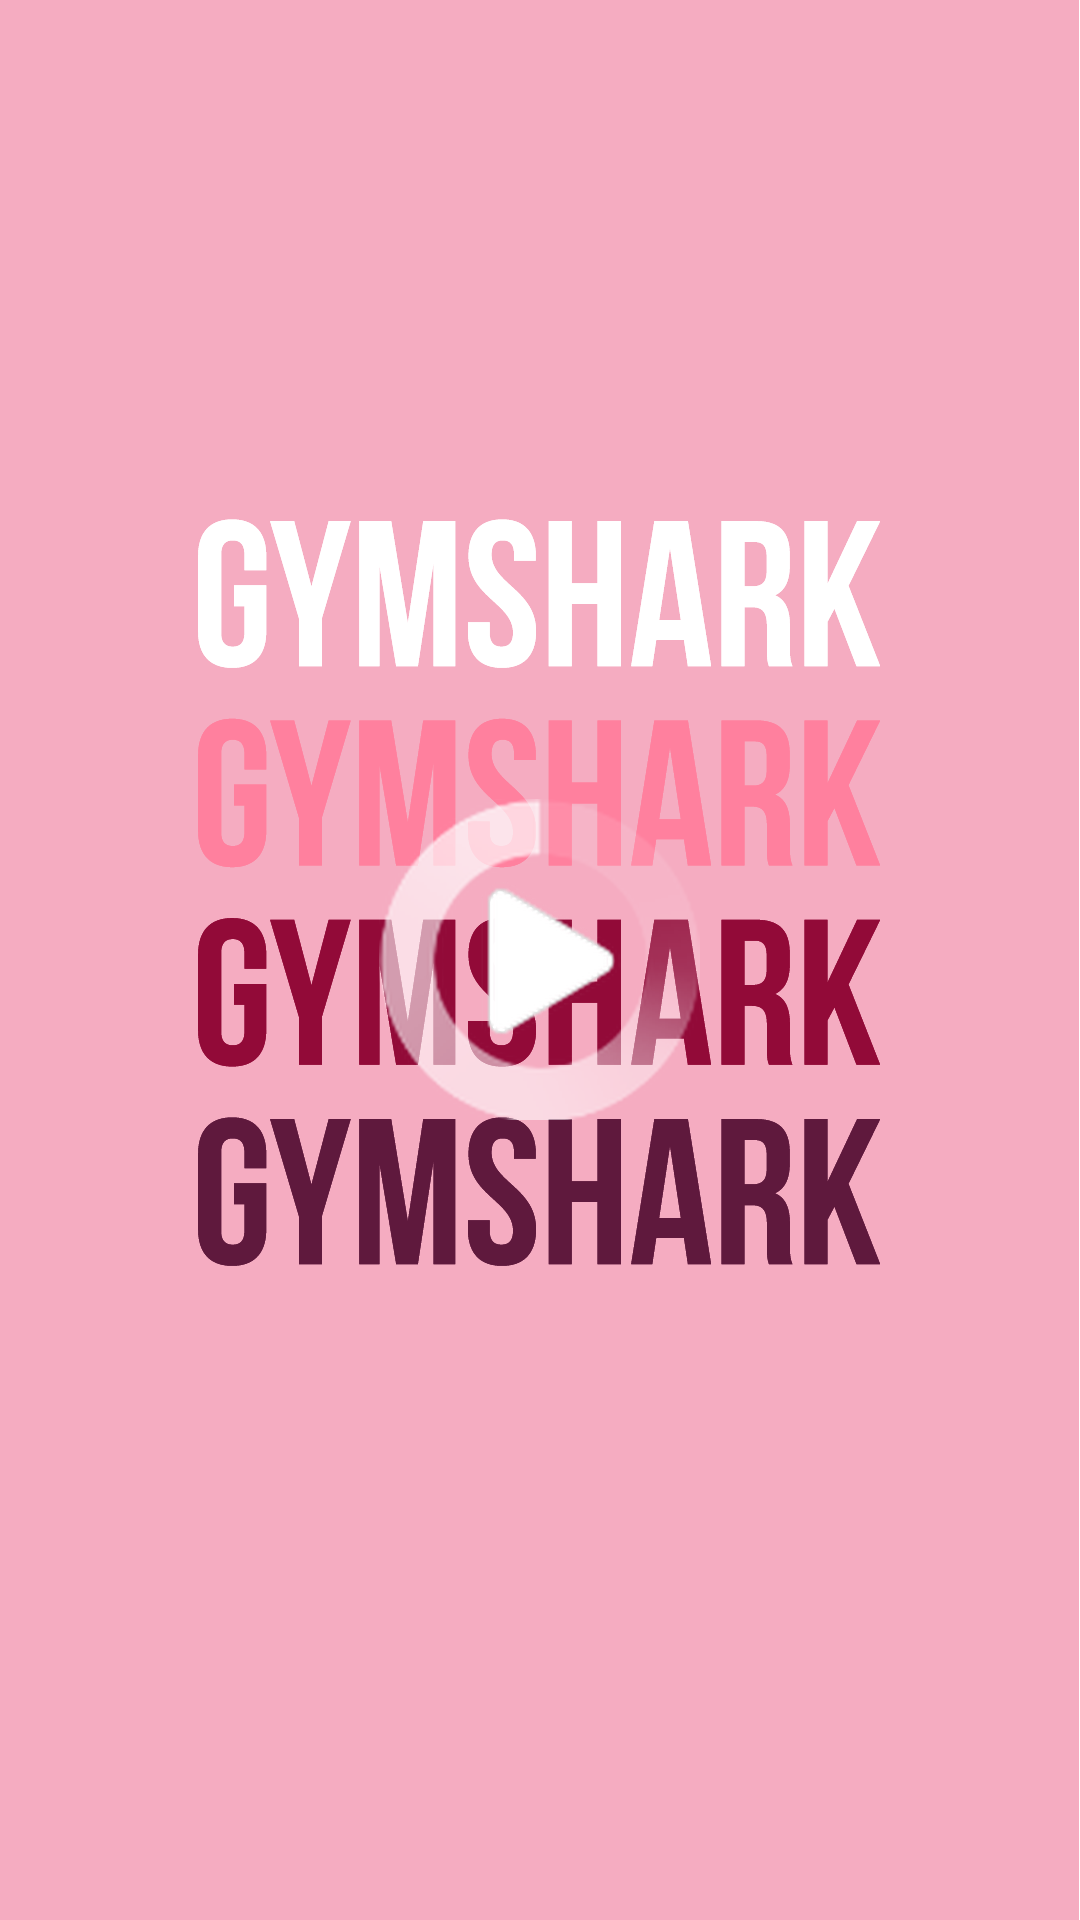 Gymshark Official Store | Gym Clothes & Workout Wear | Gymshark - Gymshark Official Store | Gym Clothes & Workout Wear | Gymshark -   12 fitness Wallpaper gymshark ideas